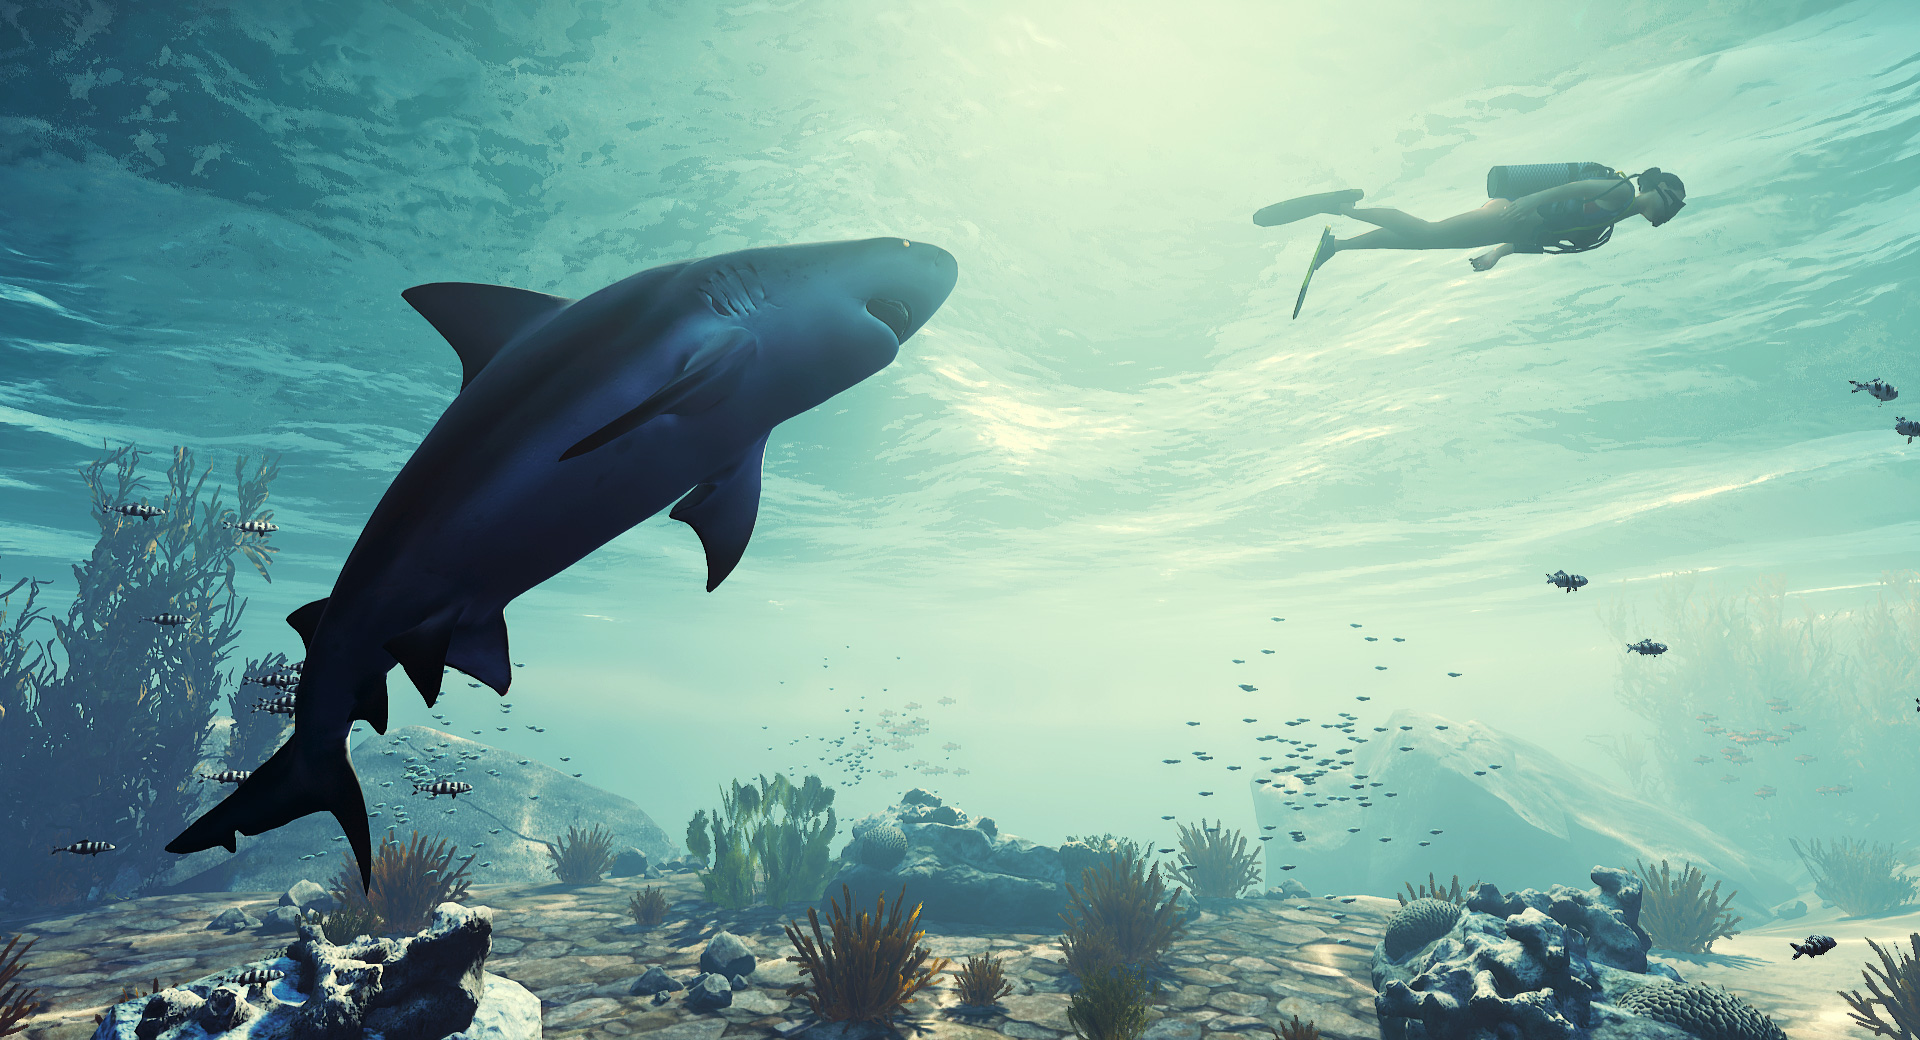 Shark Arpg Maneater Will Be An Epic Games Store Exclusive For The